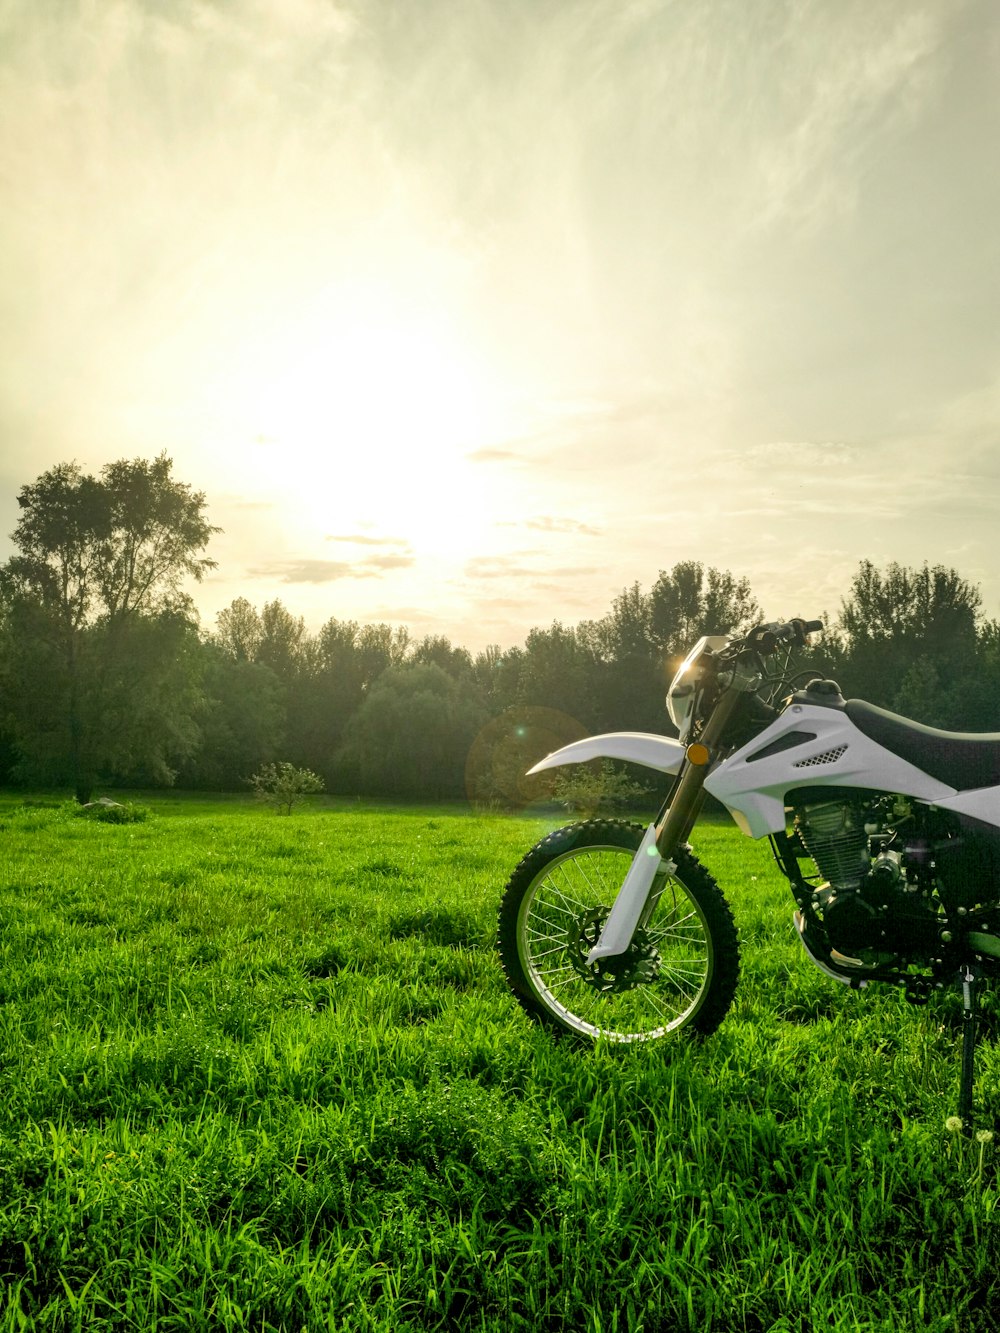 a bicycle parked in a grassy field